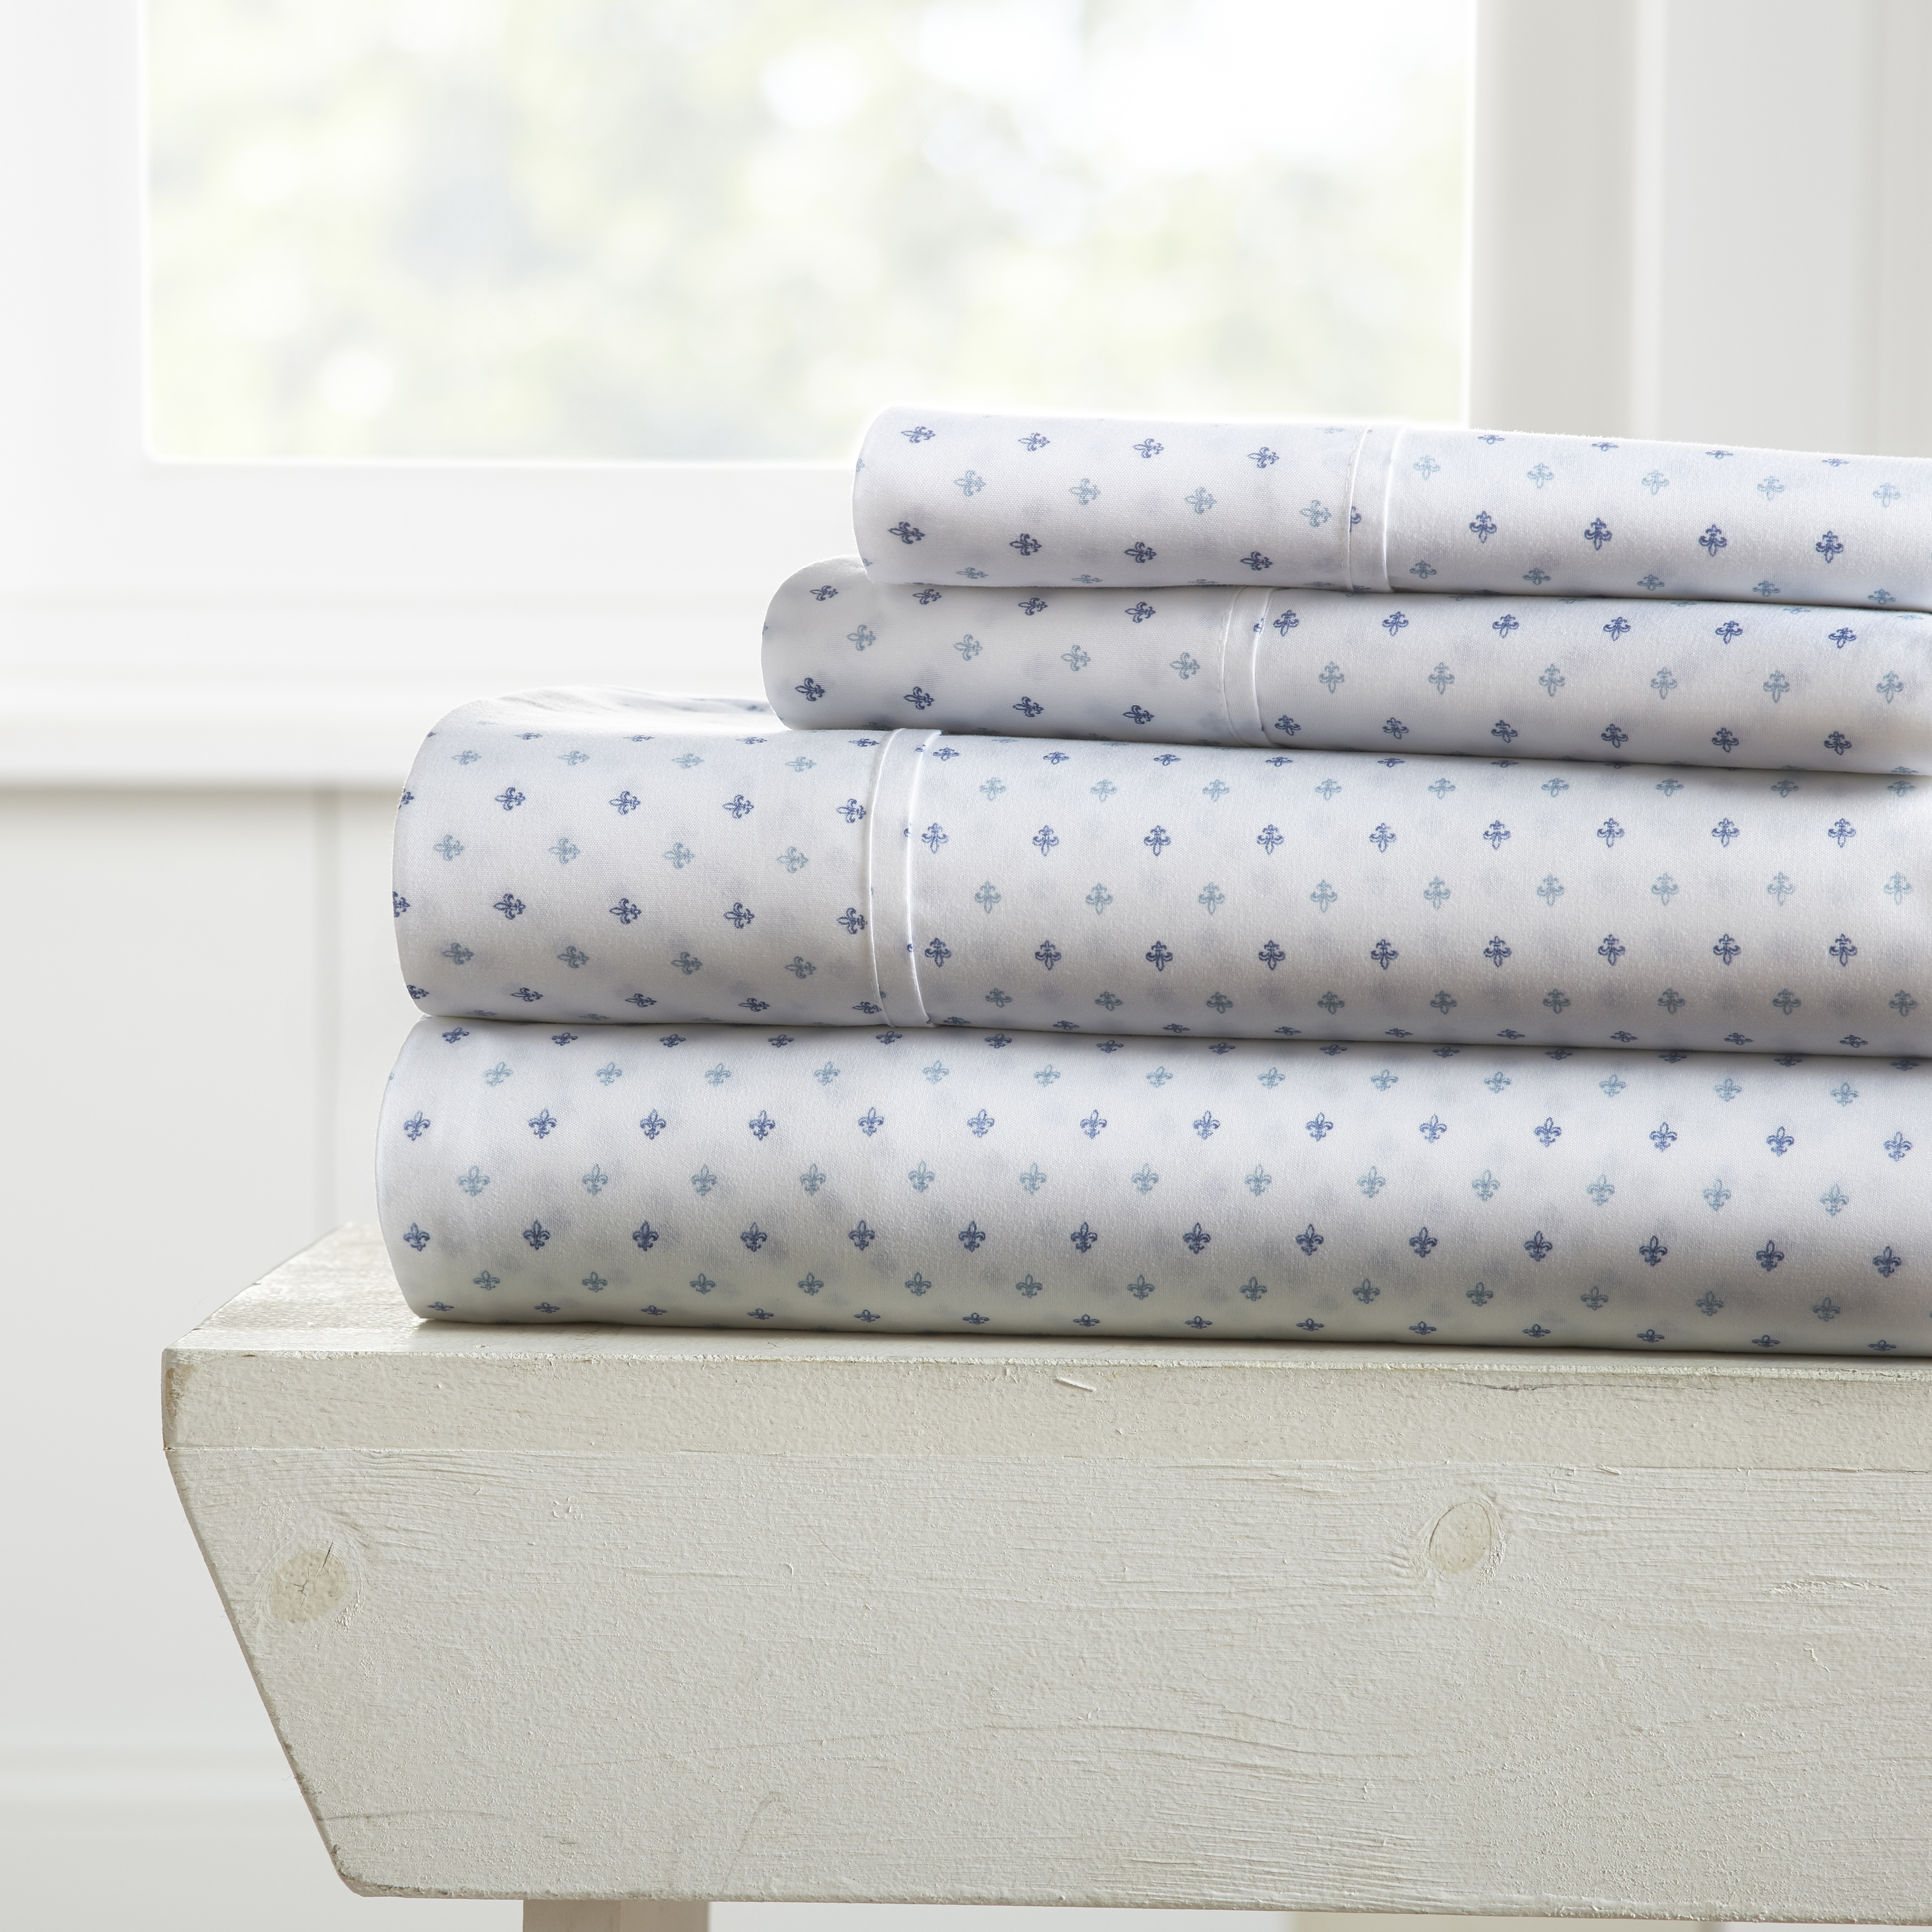 Linen's & Hutch Lily Patterned Sheet Set: Starting from $19.44 + Free Shipping!